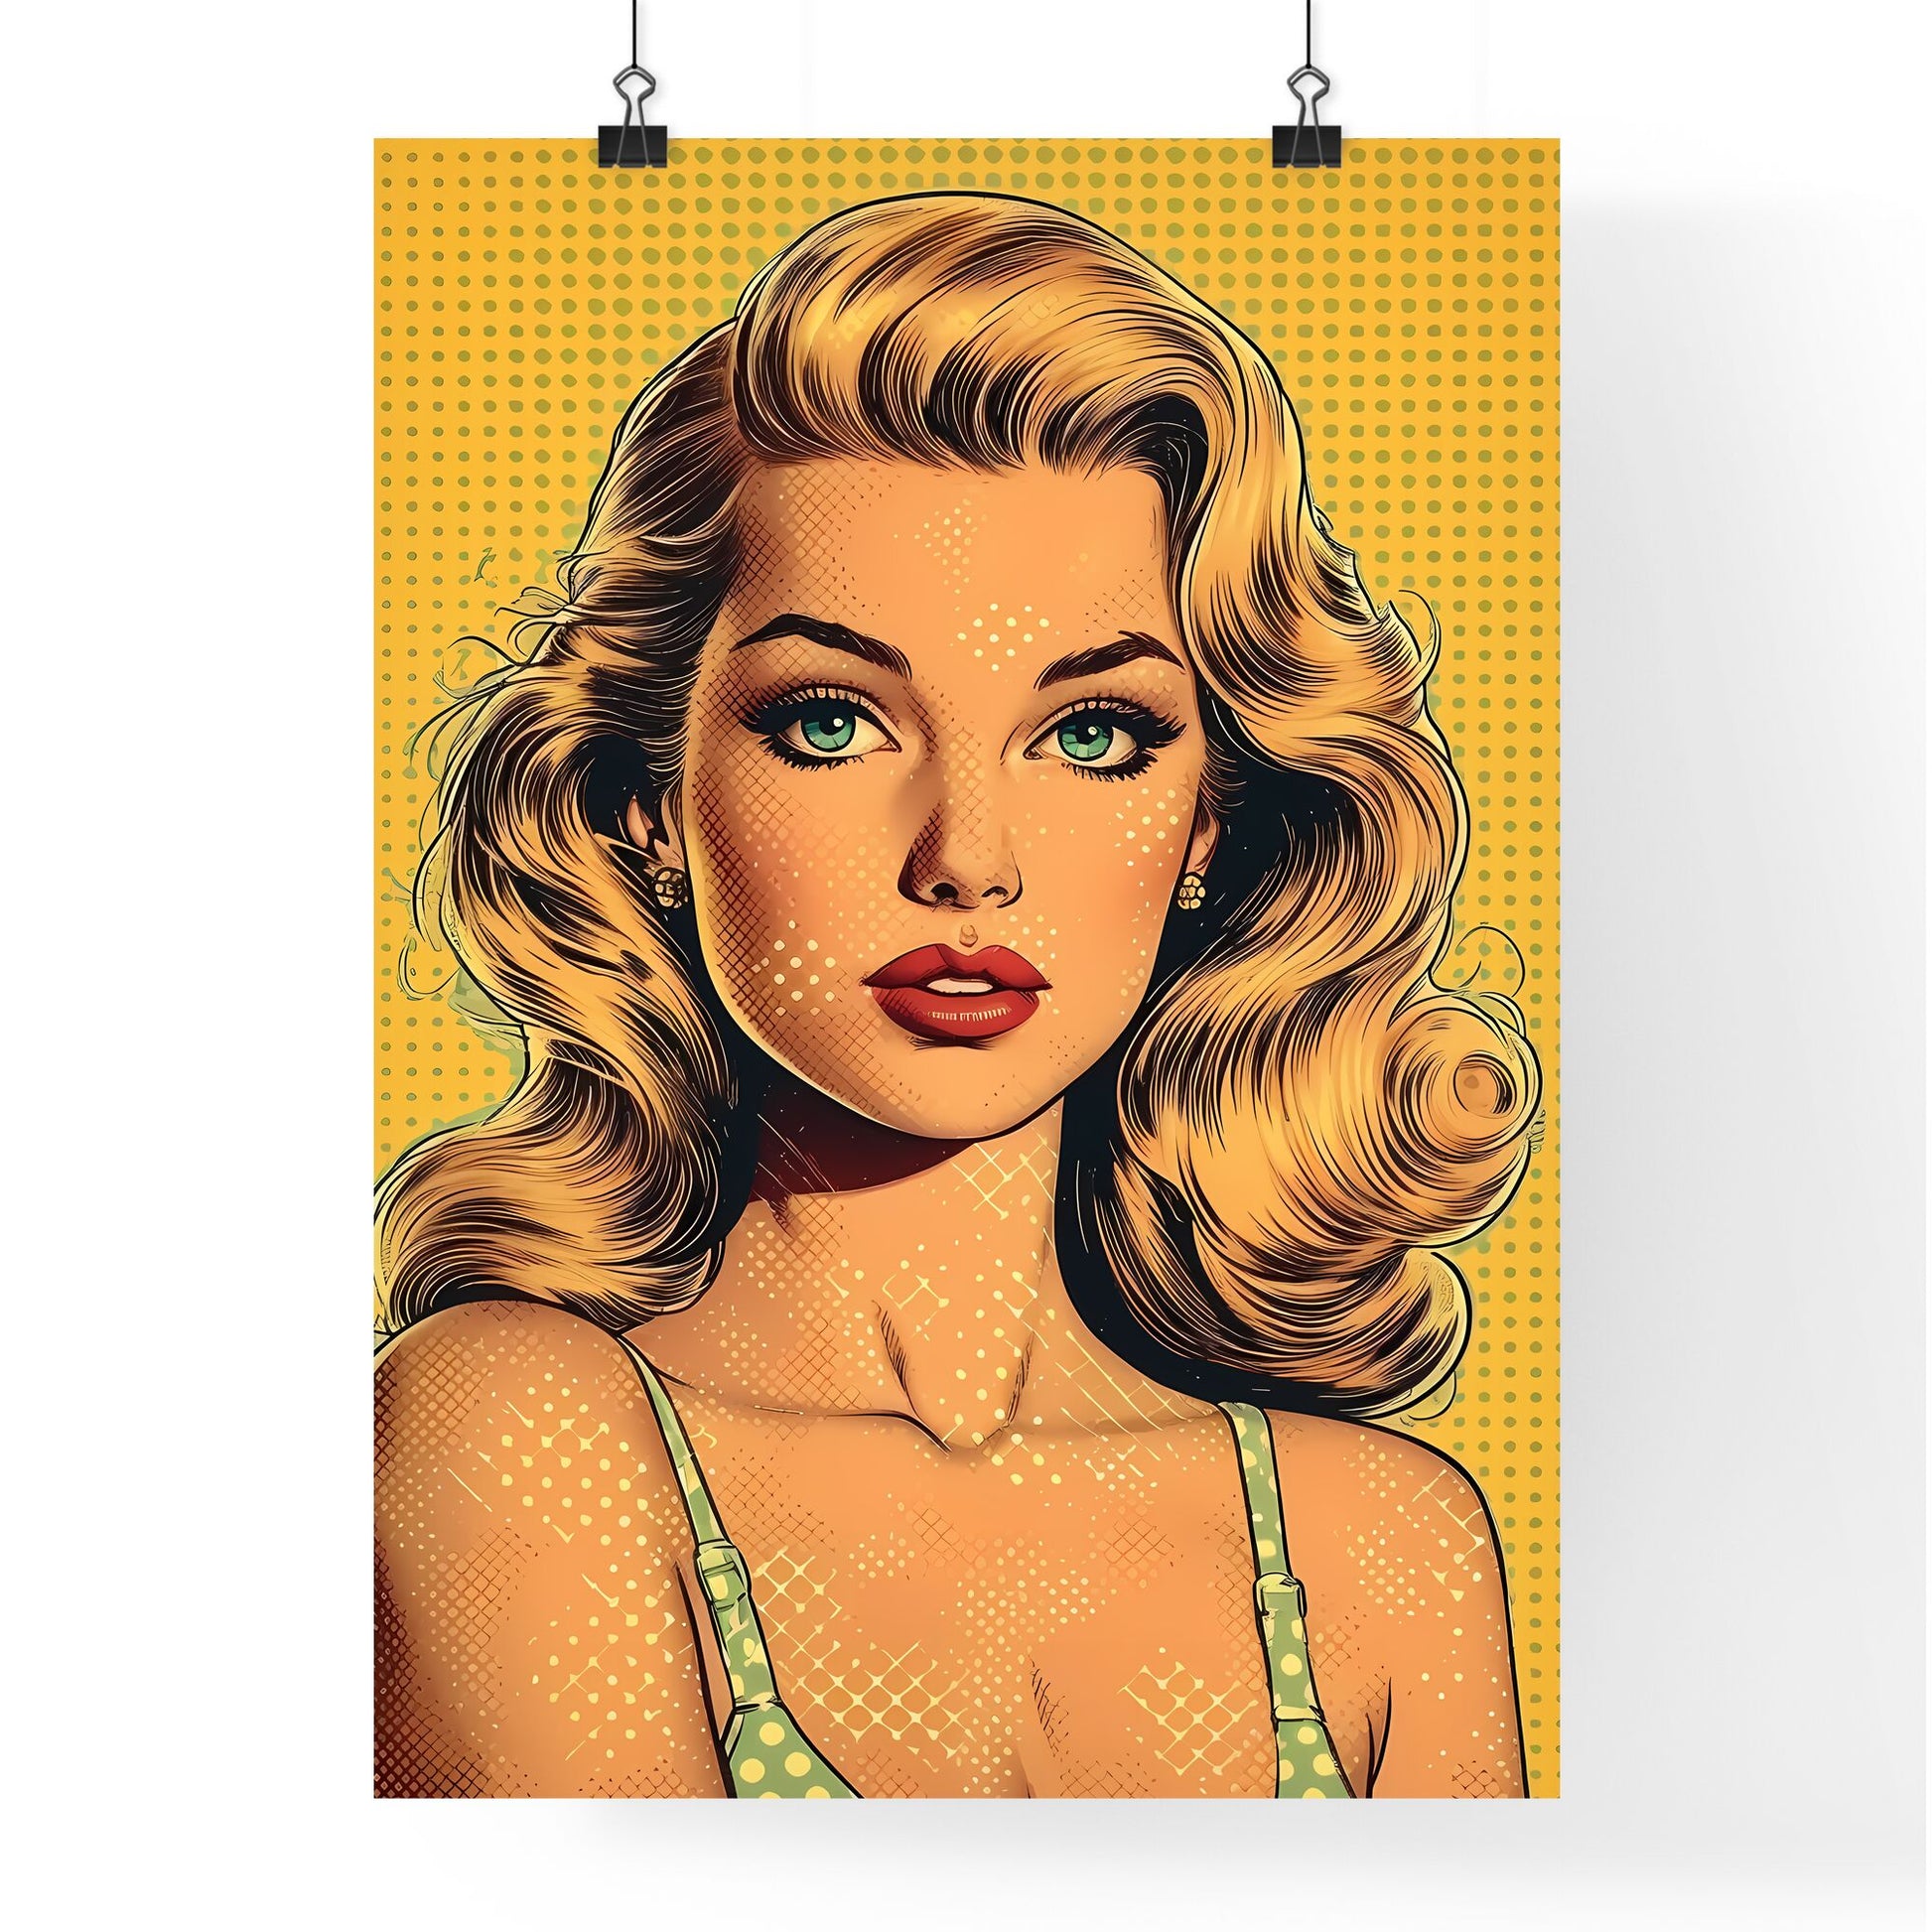 1959 pin up girl - Art print of a woman with long hair and green eyes Default Title